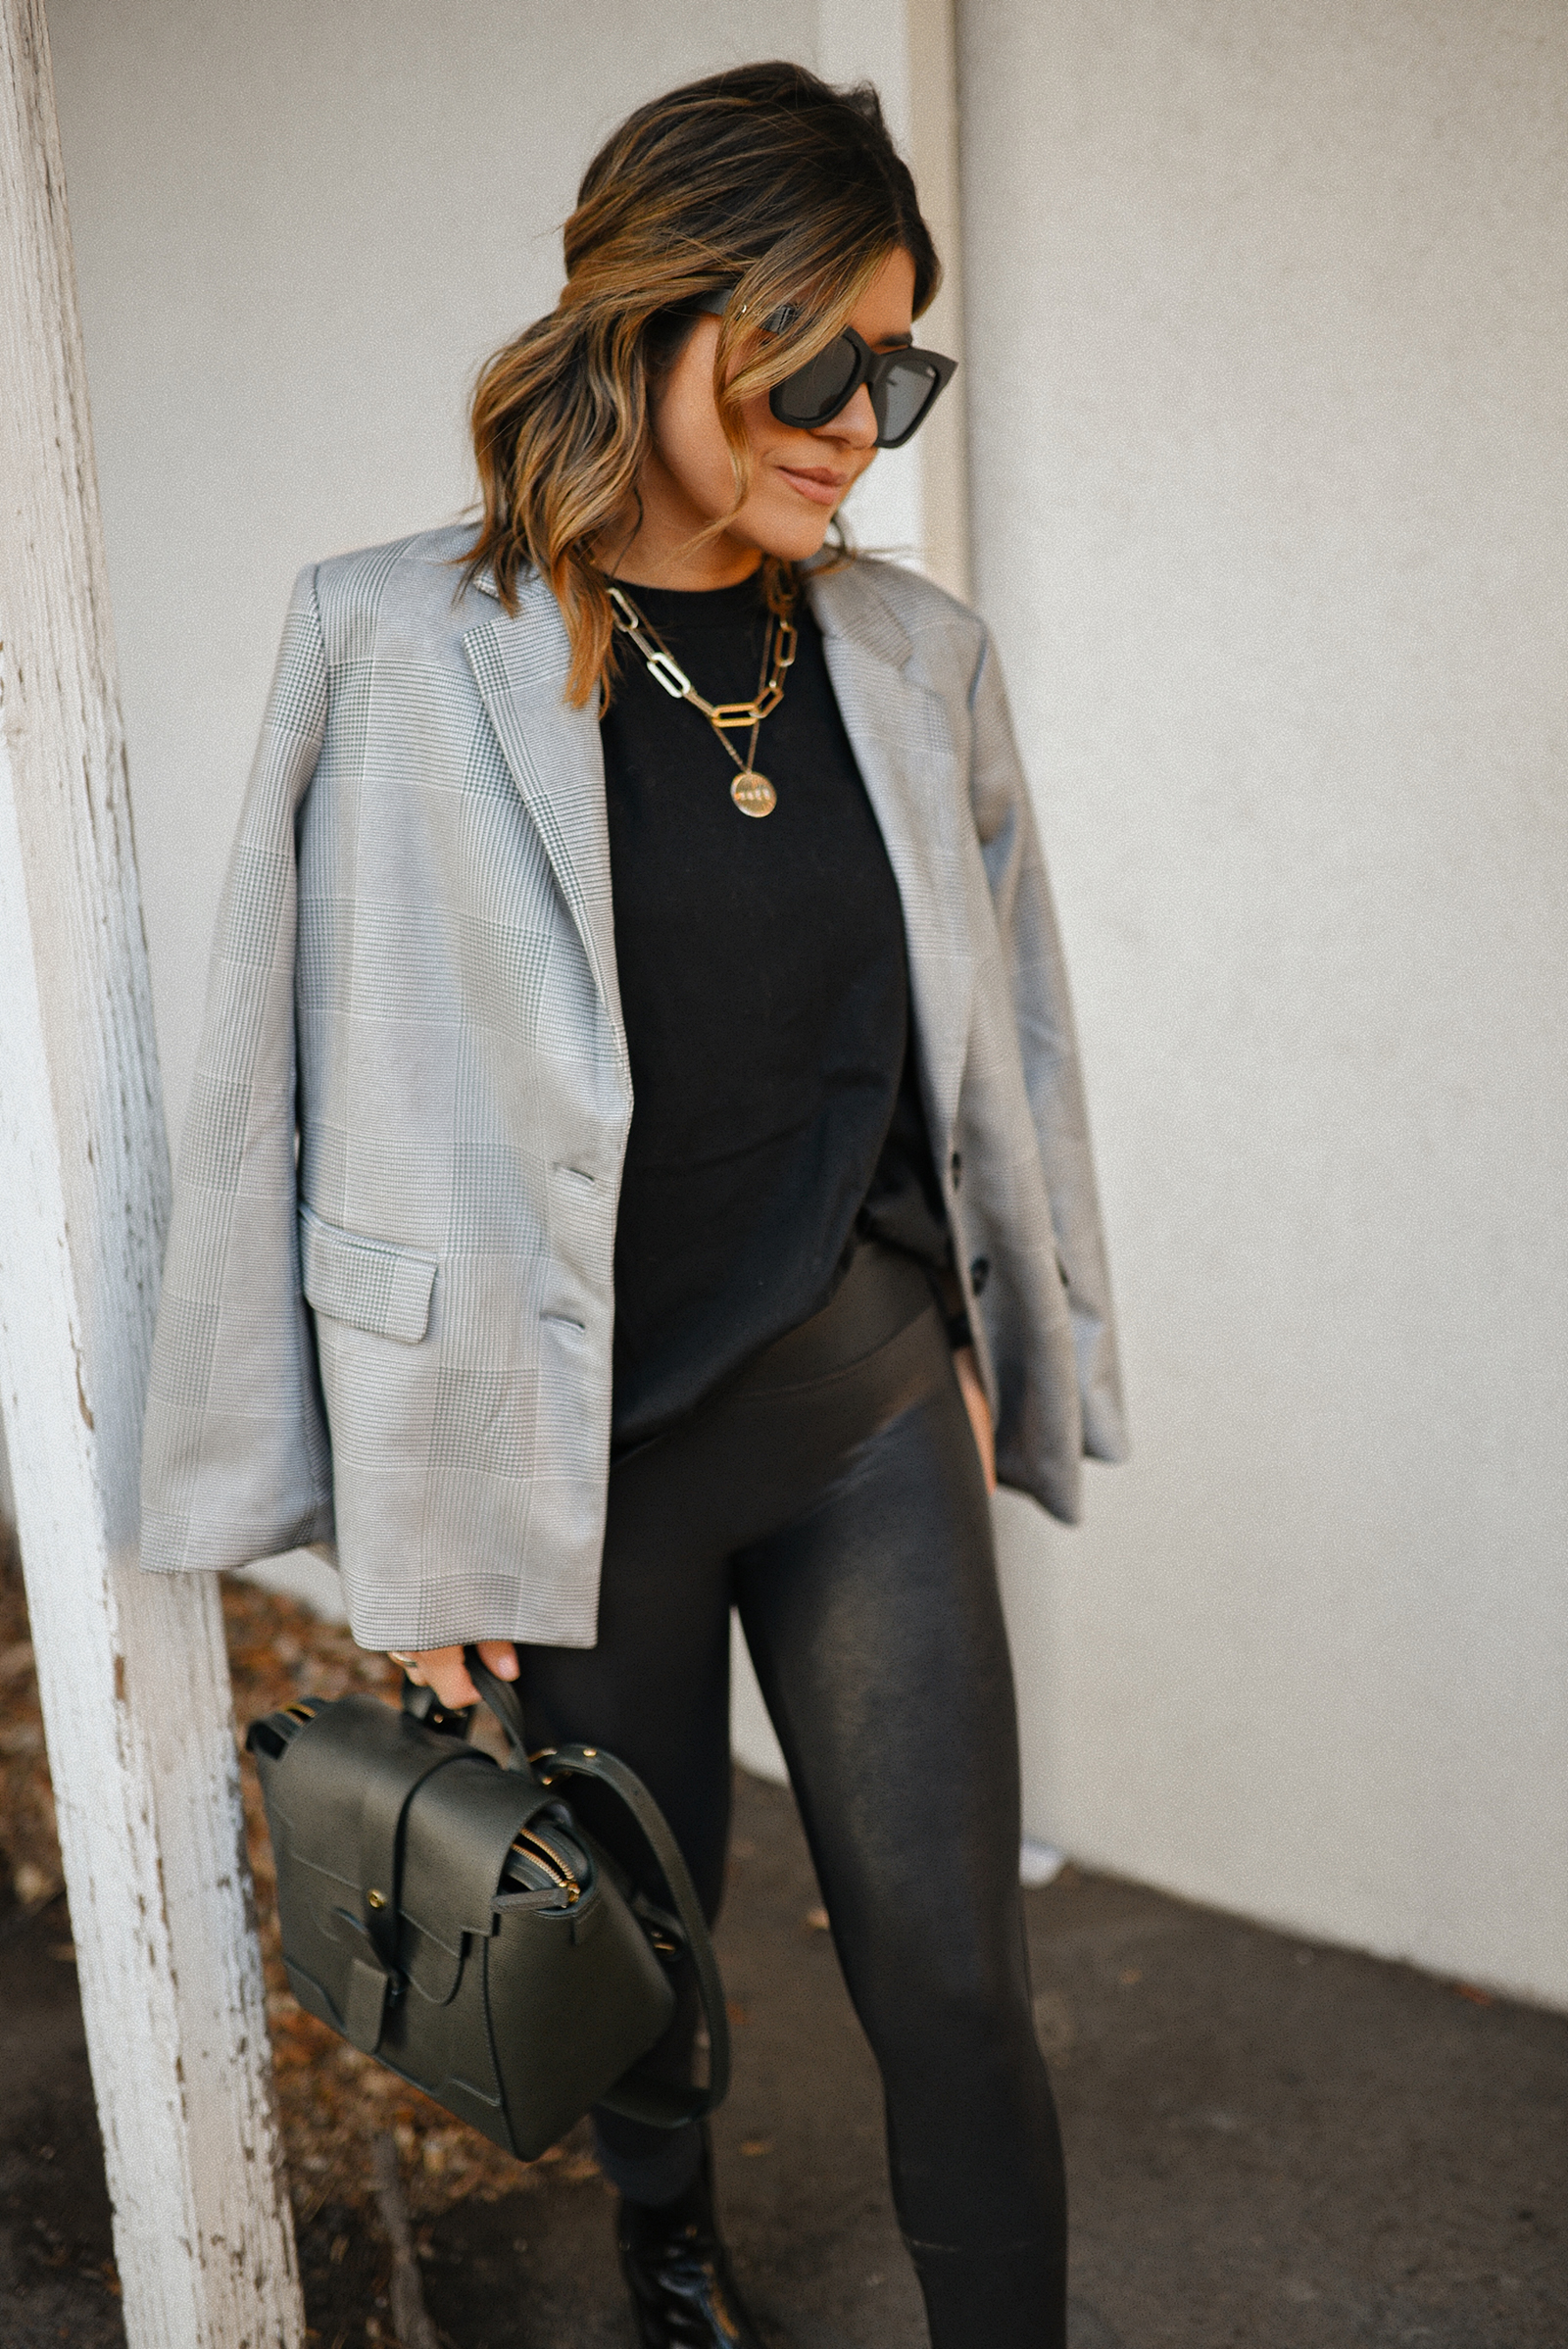 A COMFY AND CHIC LOOK WITH FAUX LEATHER LEGGINGS, CHIC TALK